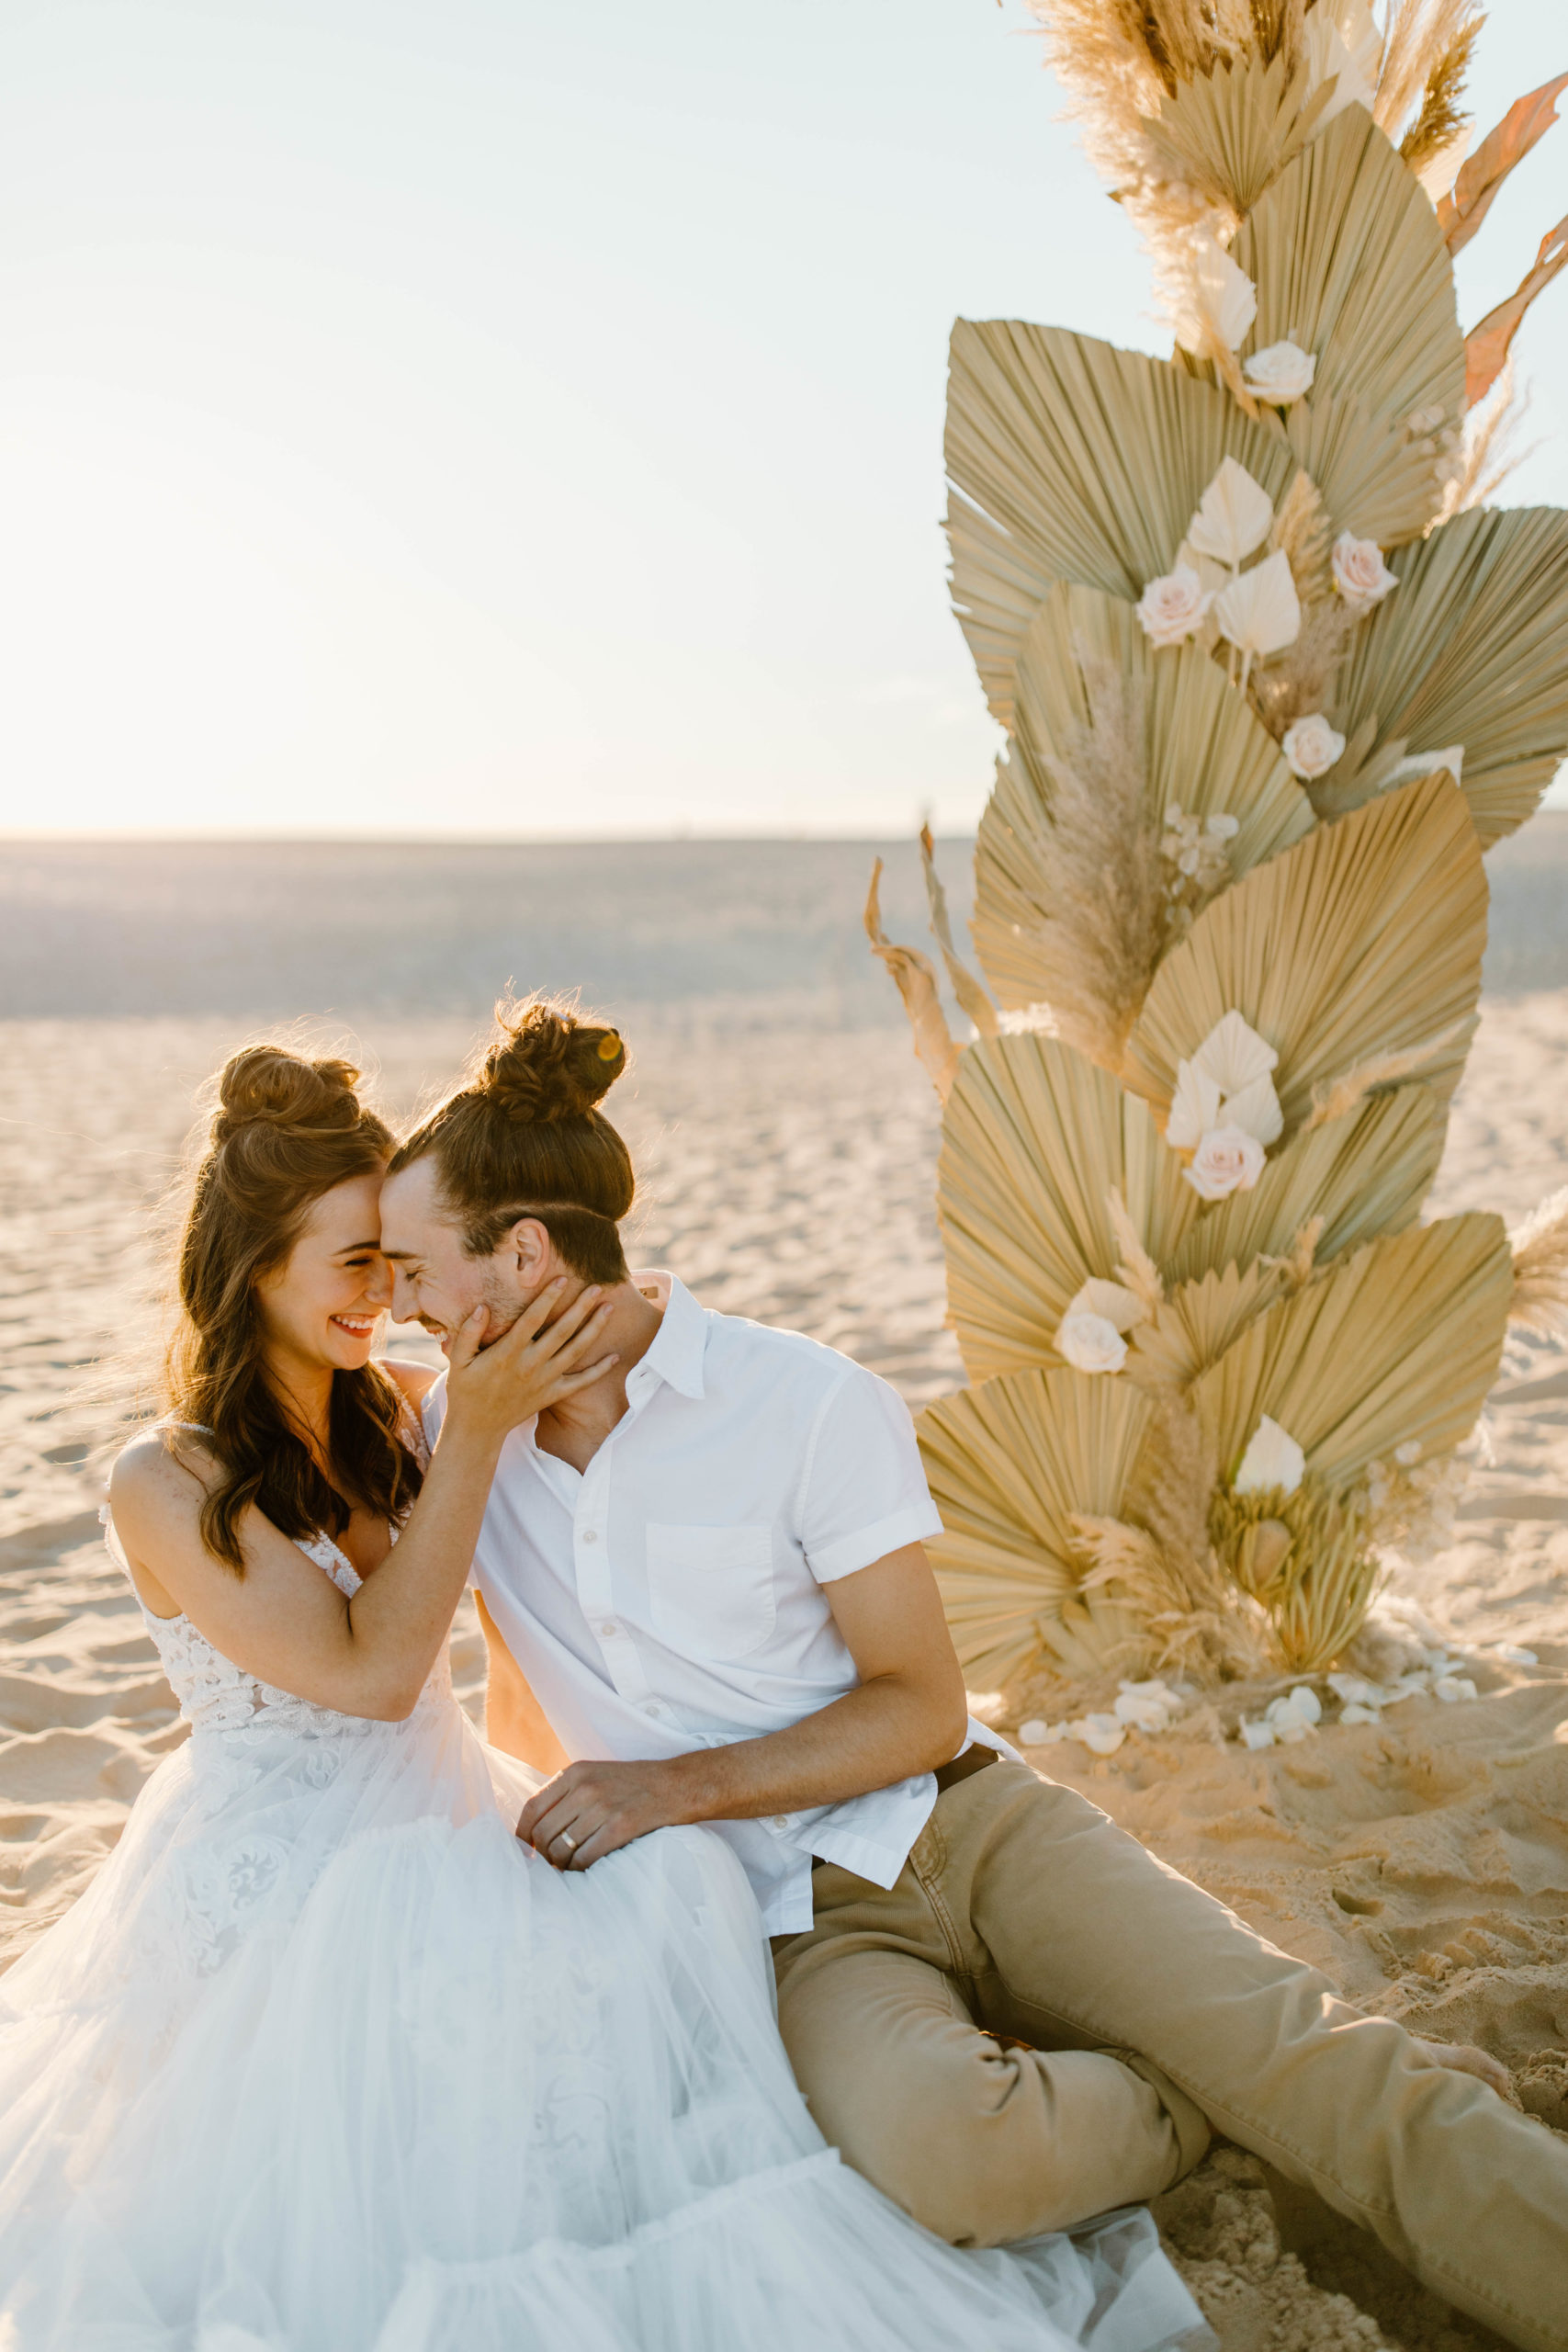 Michigan Elopement in sand dunes with candid bride and groom